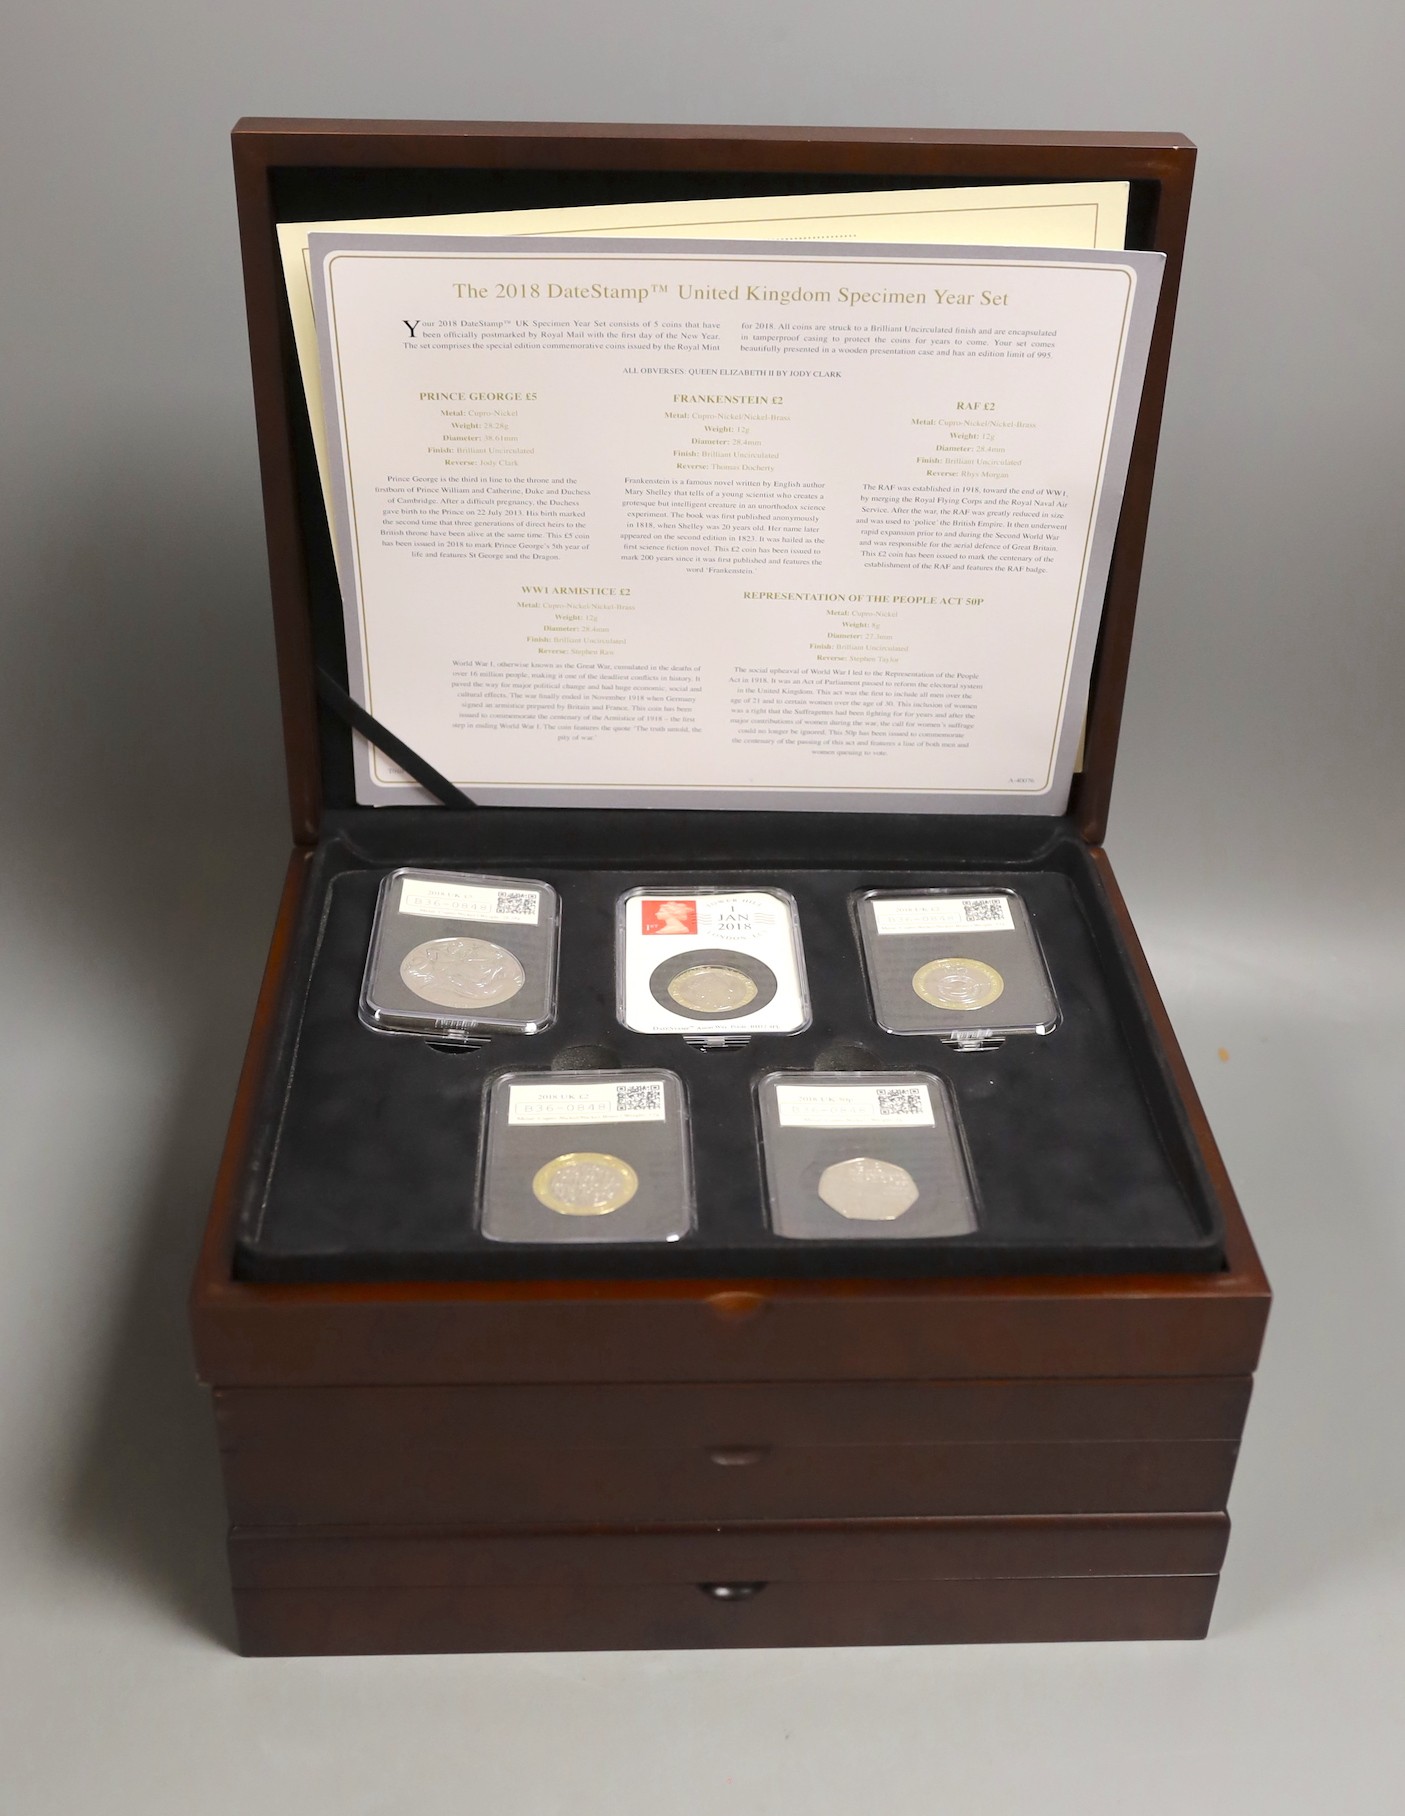 UK uncirculated commemorative 50p, £1, £2 and £5 coins, issued by DateStamp and coin portfolio management, cased or packaged